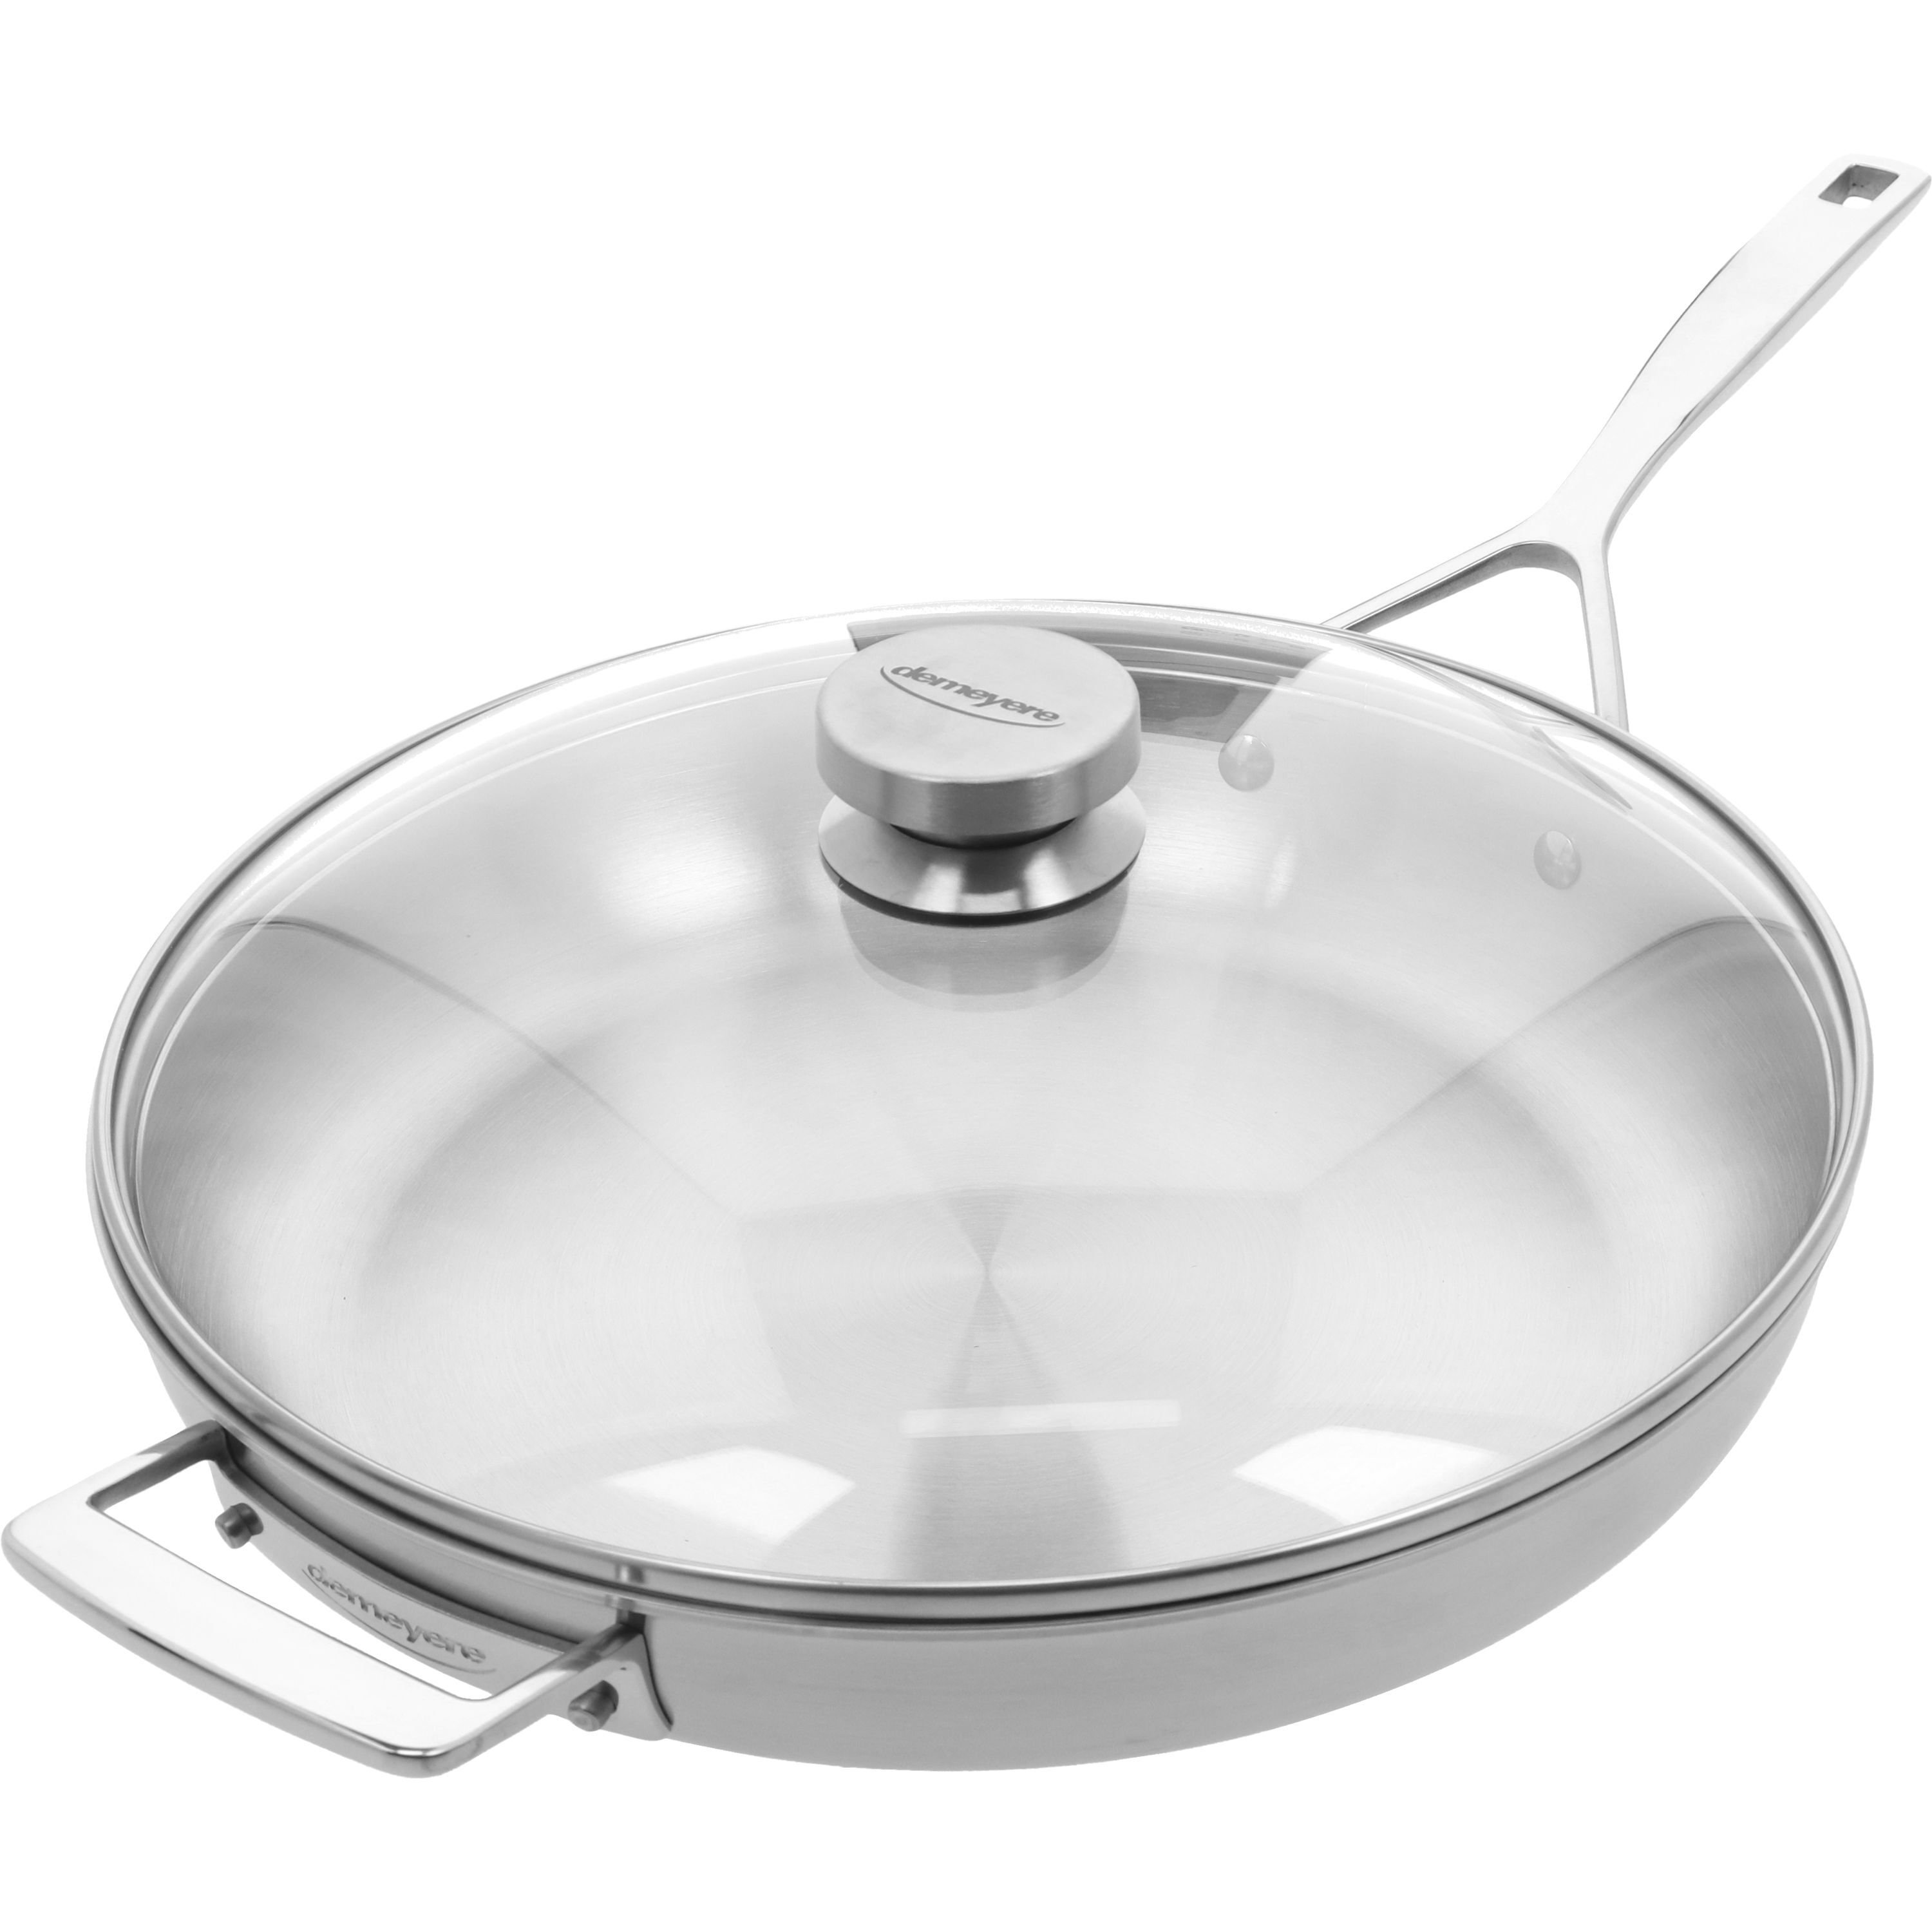 Zwilling J. A. Henckels Aurora 5-Ply Stainless Steel Cookware Review